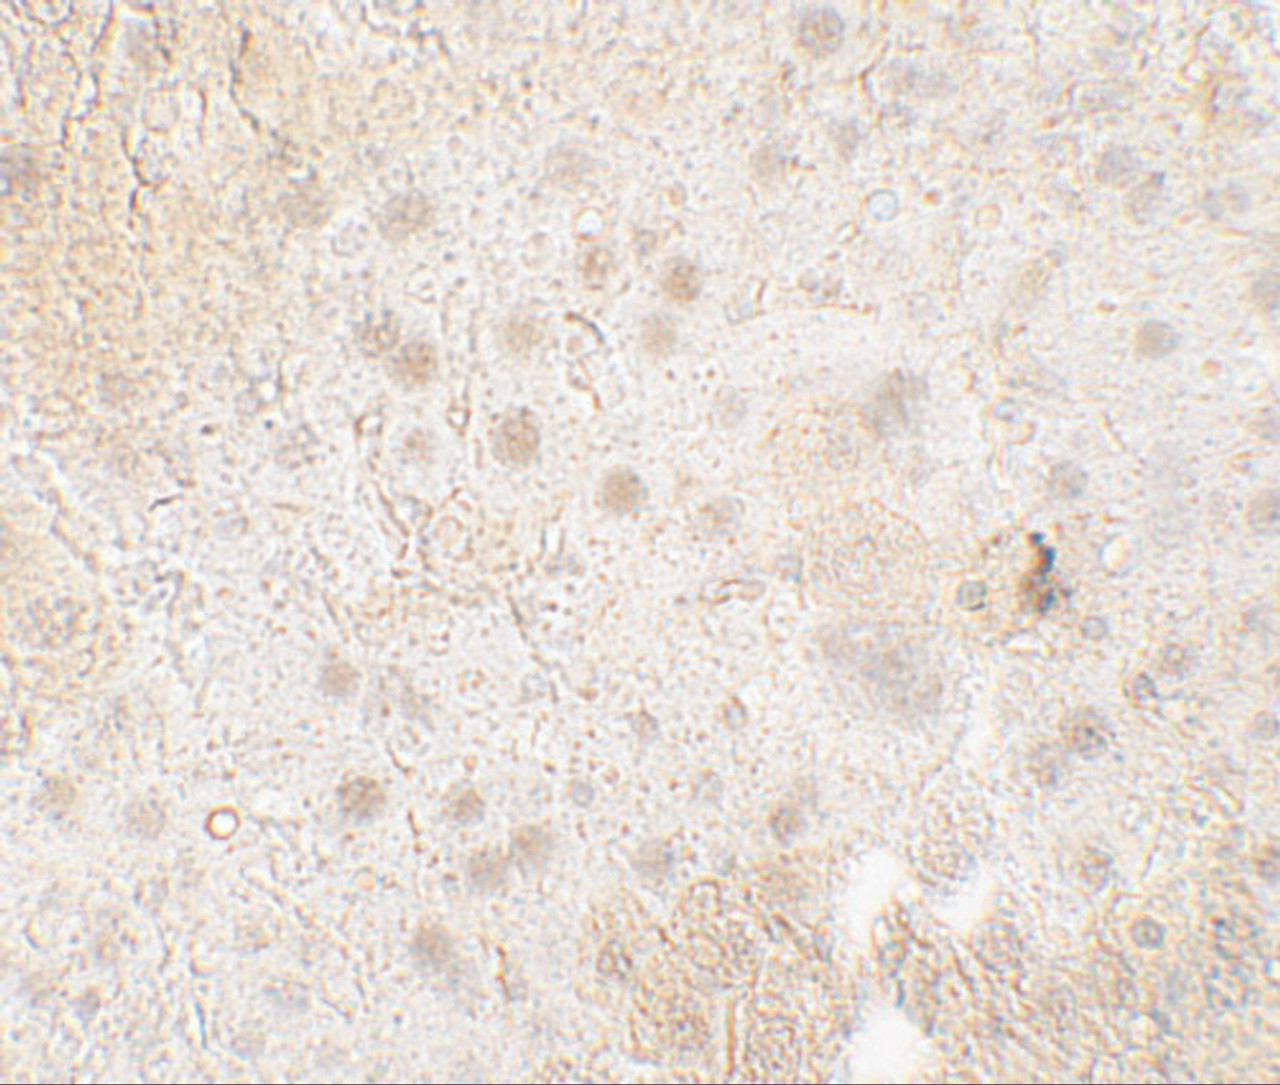 Immunohistochemistry of TMIGD1 in mouse liver tissue with TMIGD1 antibody at 5 ug/mL.